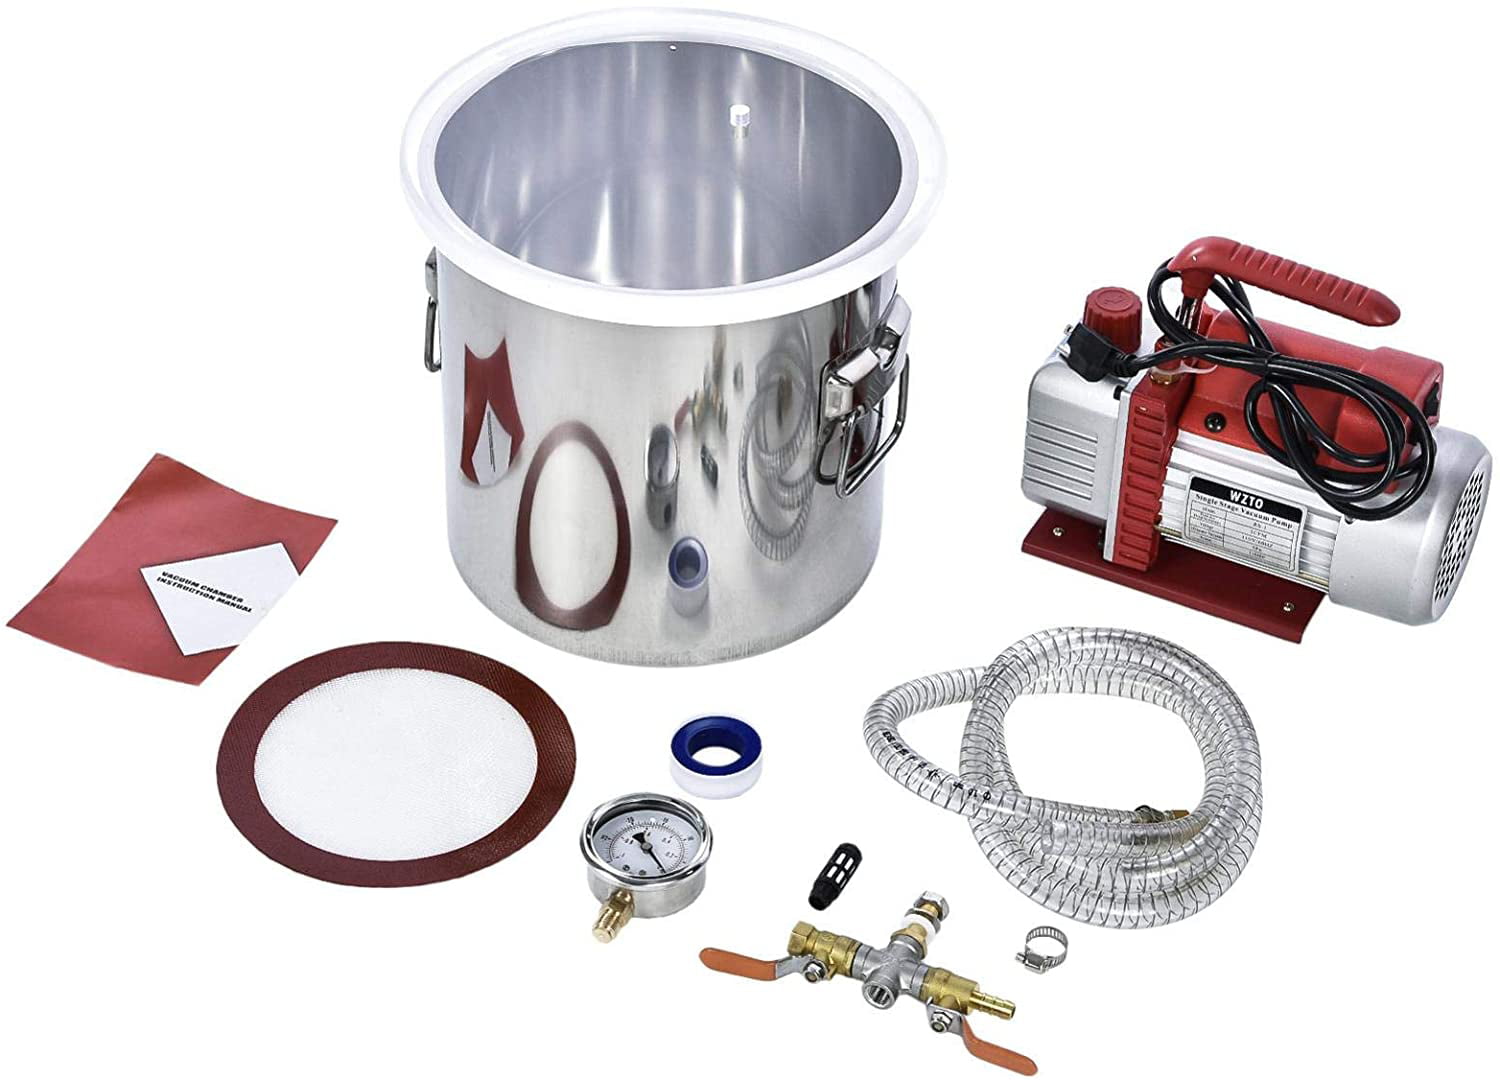 1.5 Gallon Tall Stainless Steel Best Value Vacs Vacuum Degassing Chamber and VE115 3CFM Single Stage Vacuum Pump Kit